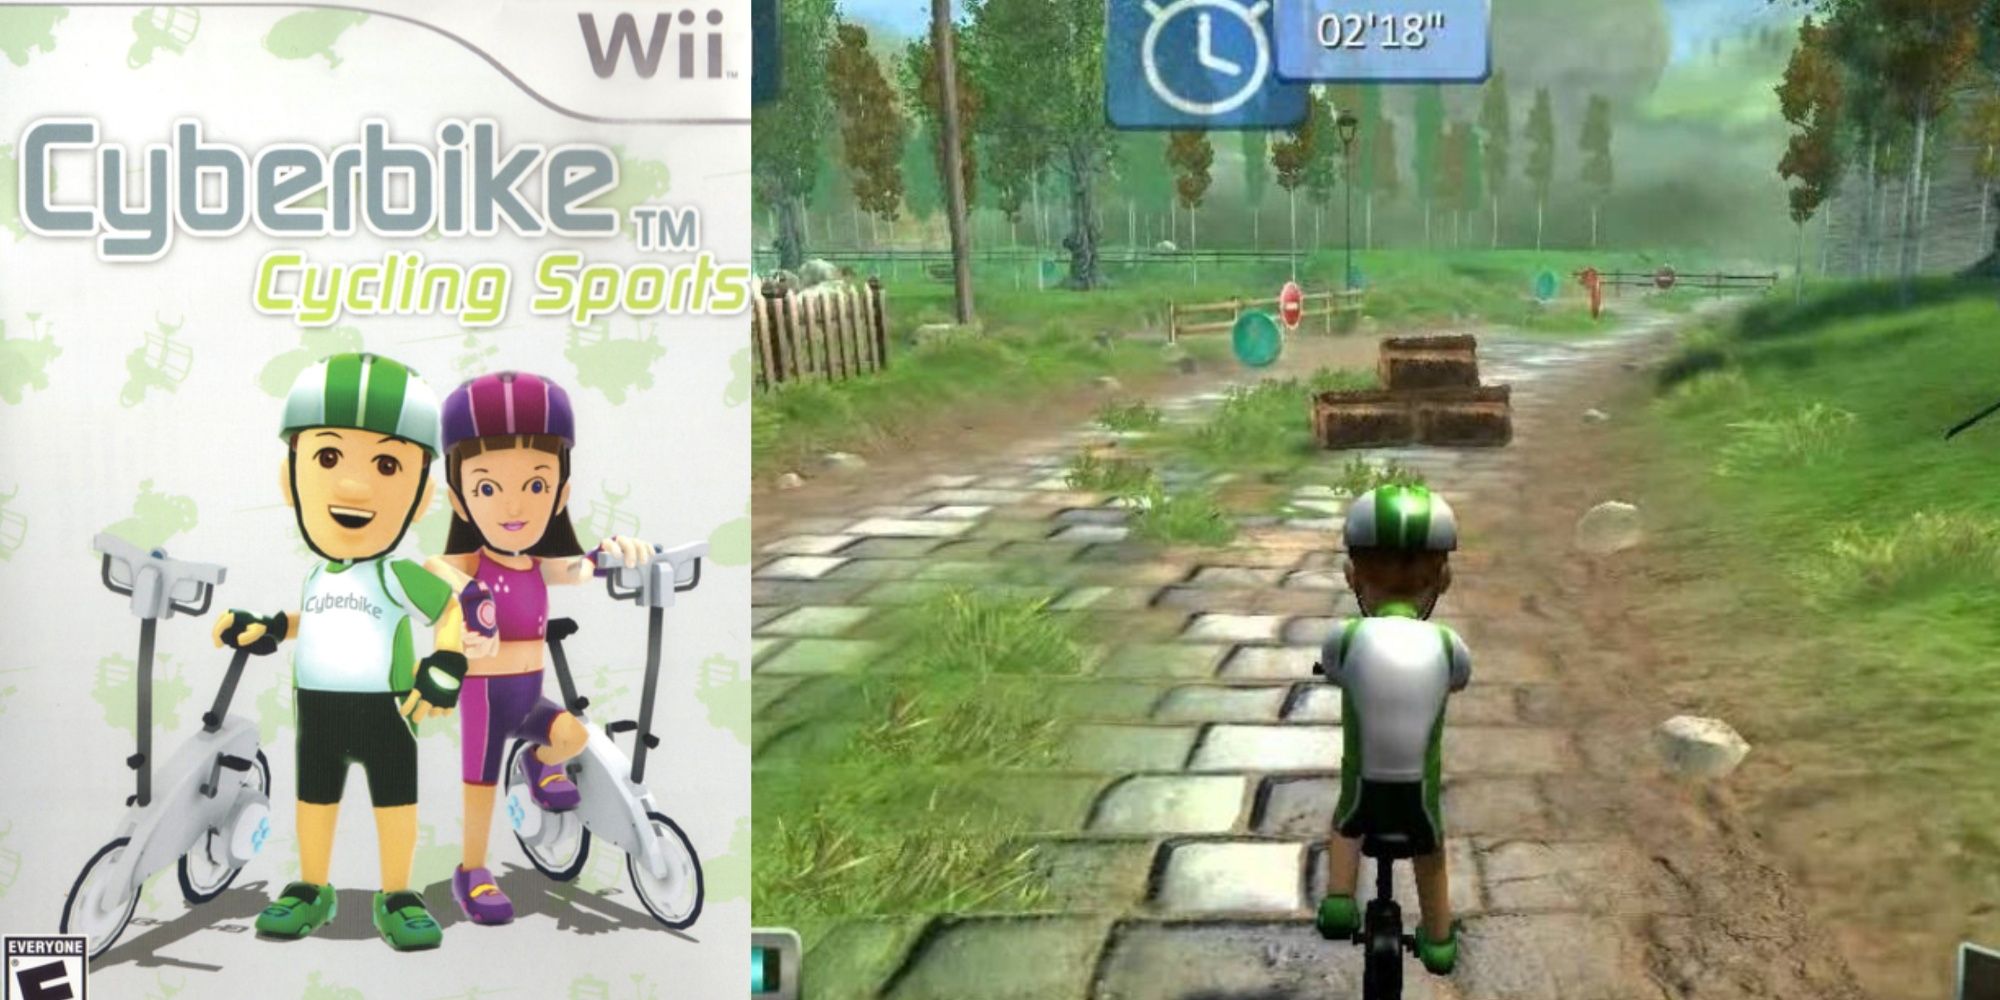 A split-image of the Wii artwork for Cyberbike and the main protagonist cycling on a road path with a timer atop the screen.